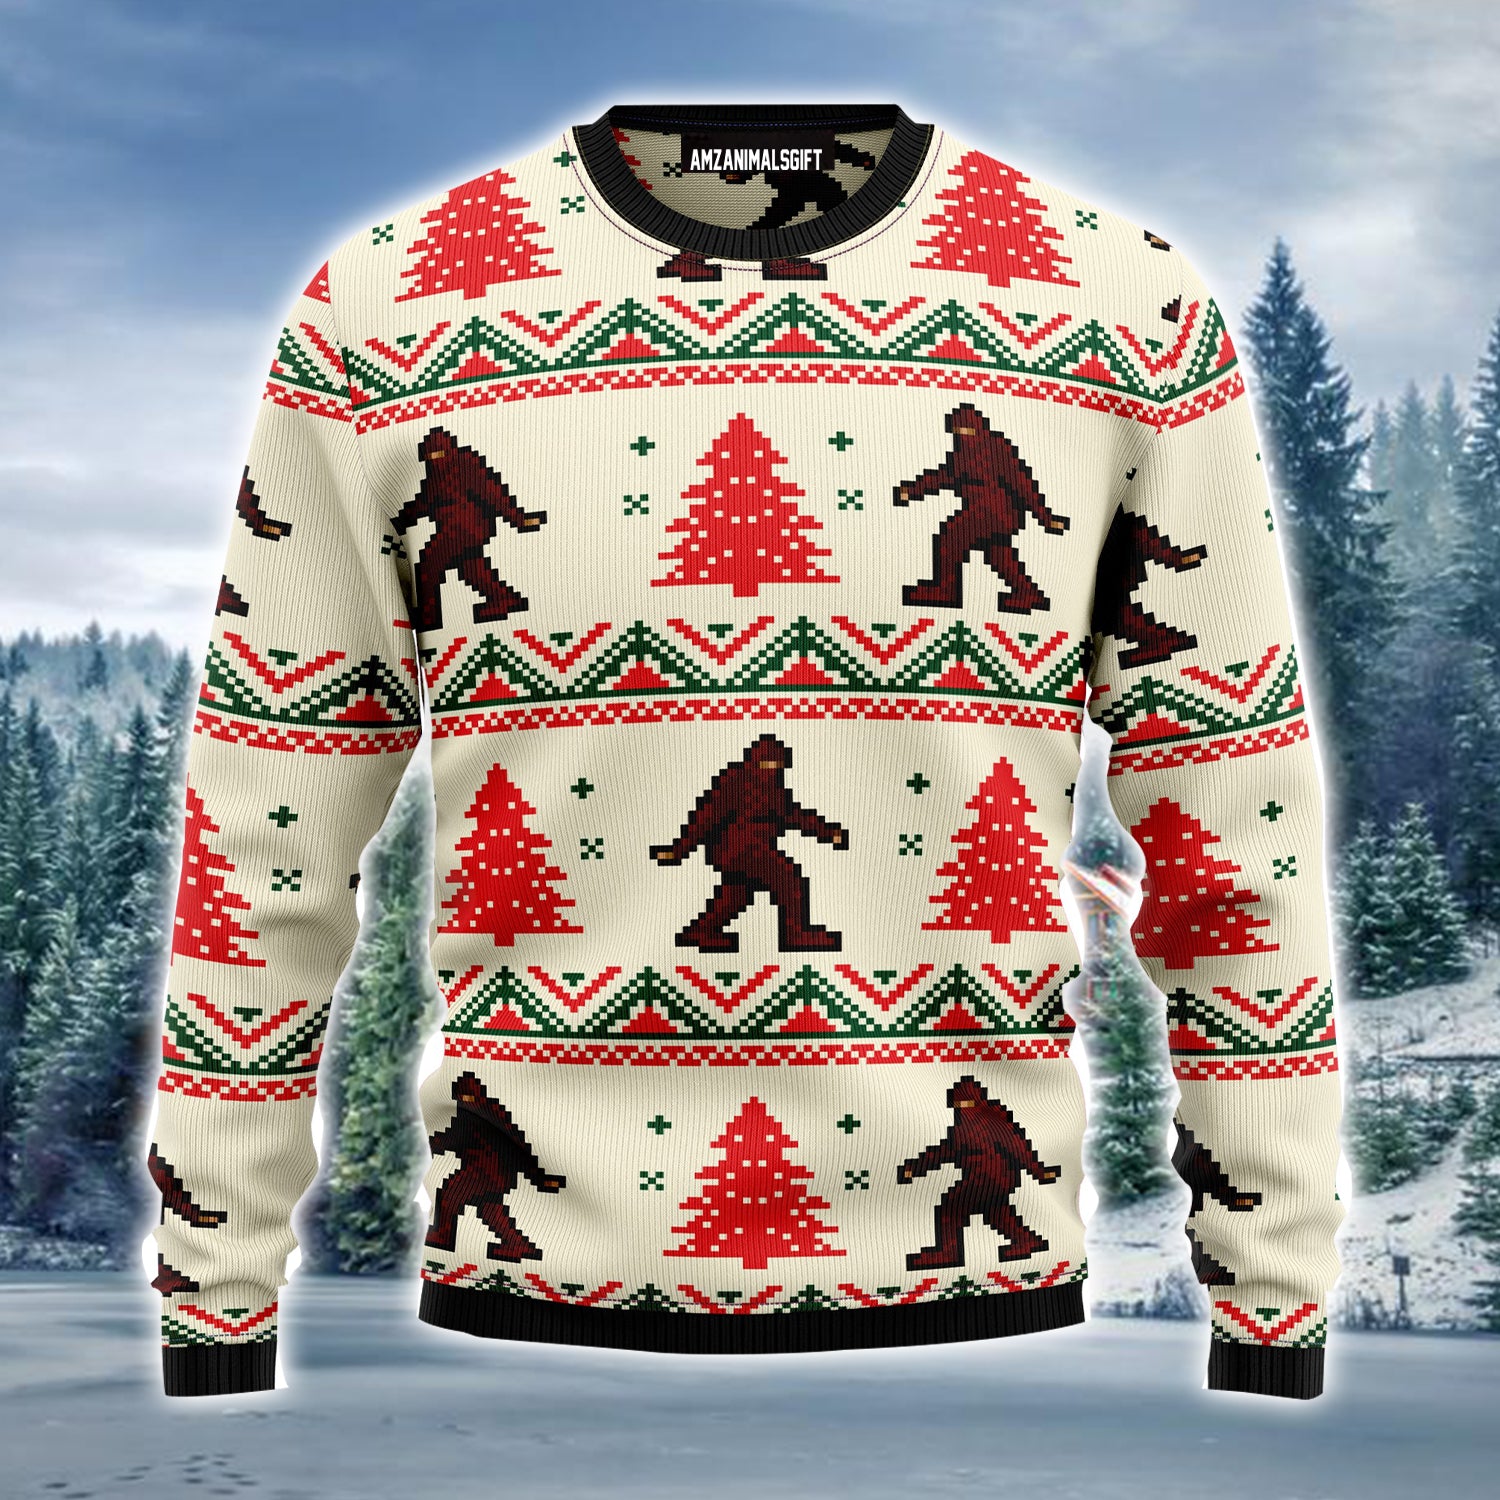 Bigfoot Ugly Christmas Sweater, Amazing Bigfoot Christmas Ugly Sweater For Men & Women - Best Gift For Christmas, Family, Friends